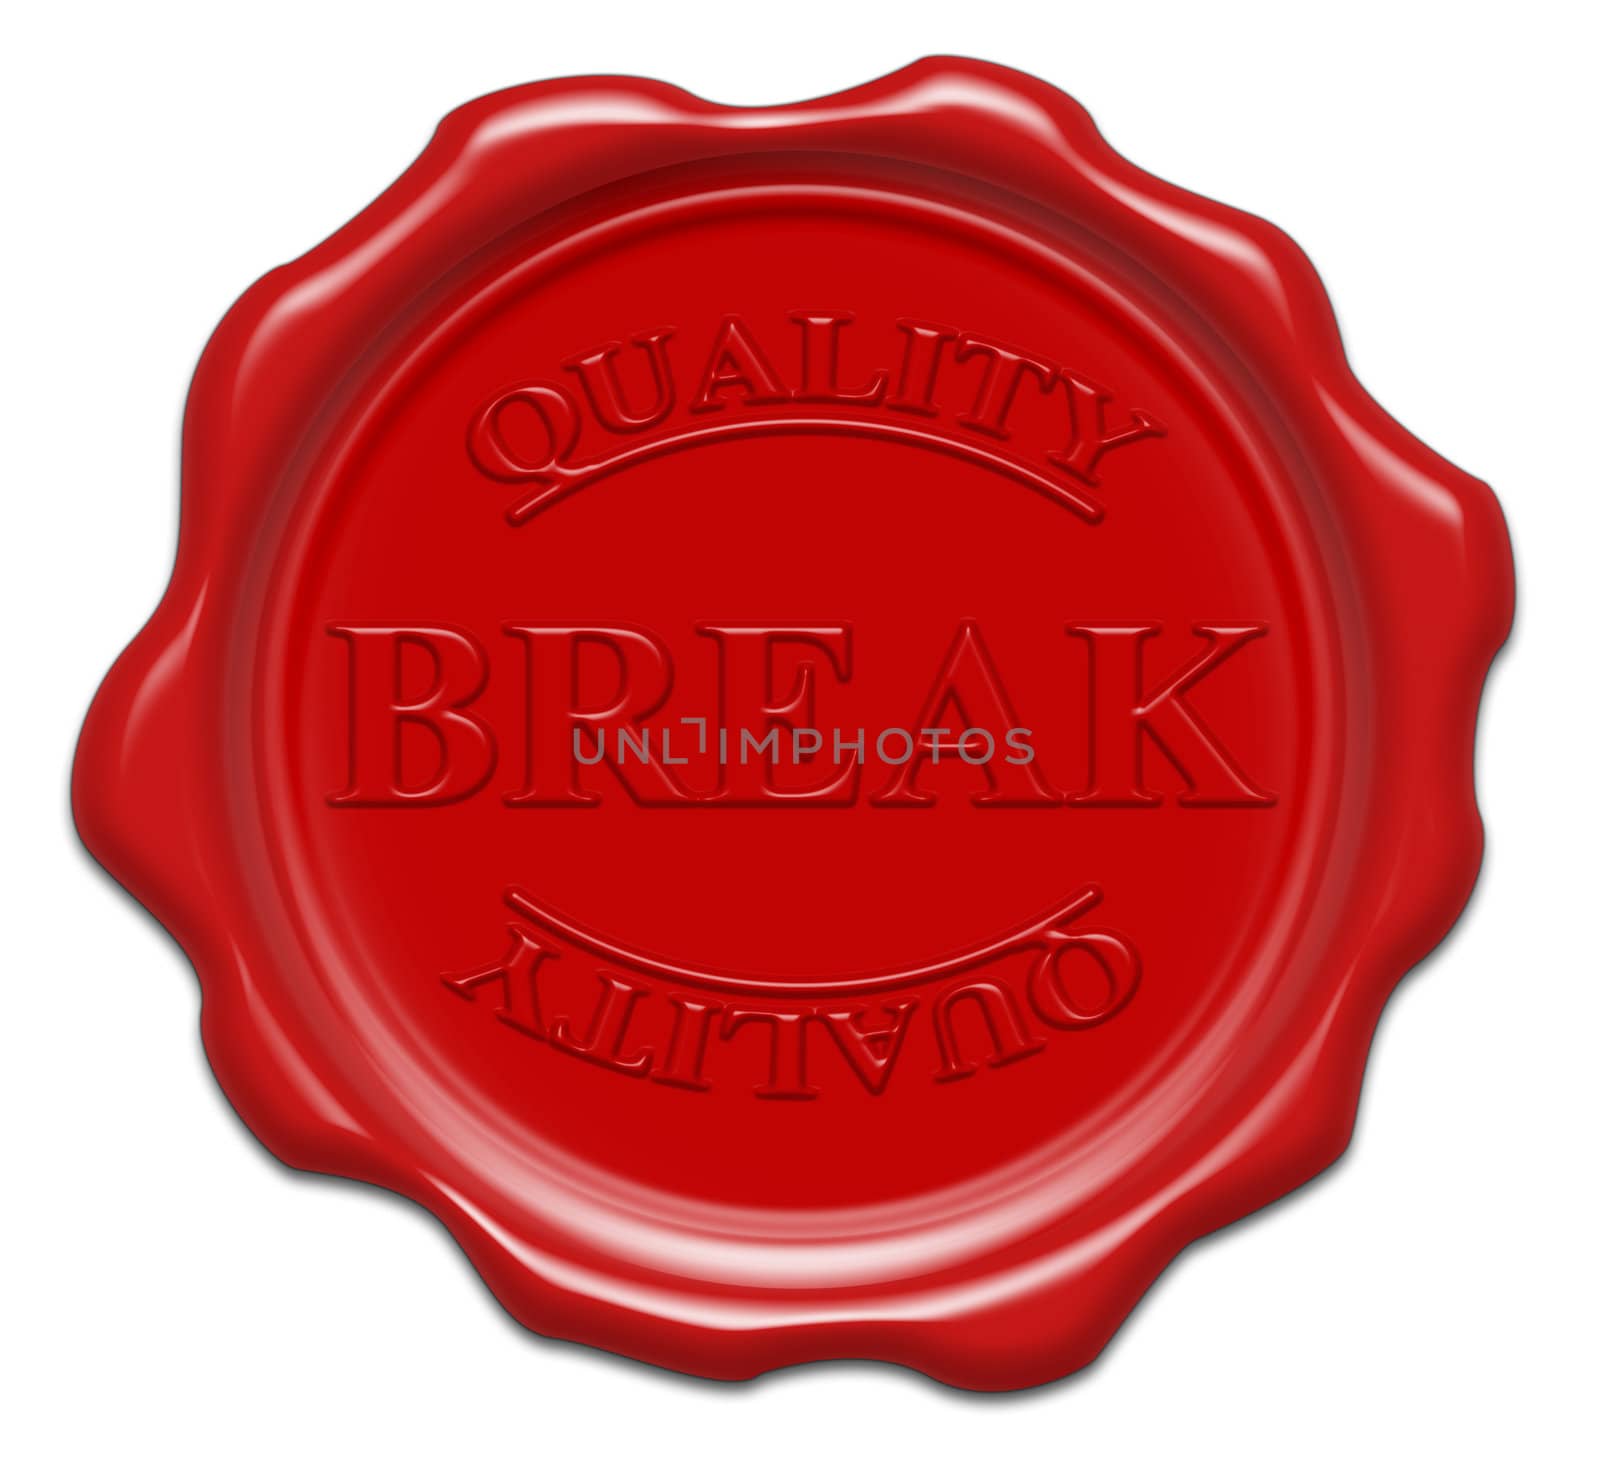 break quality - illustration red wax seal isolated on white background with word : break